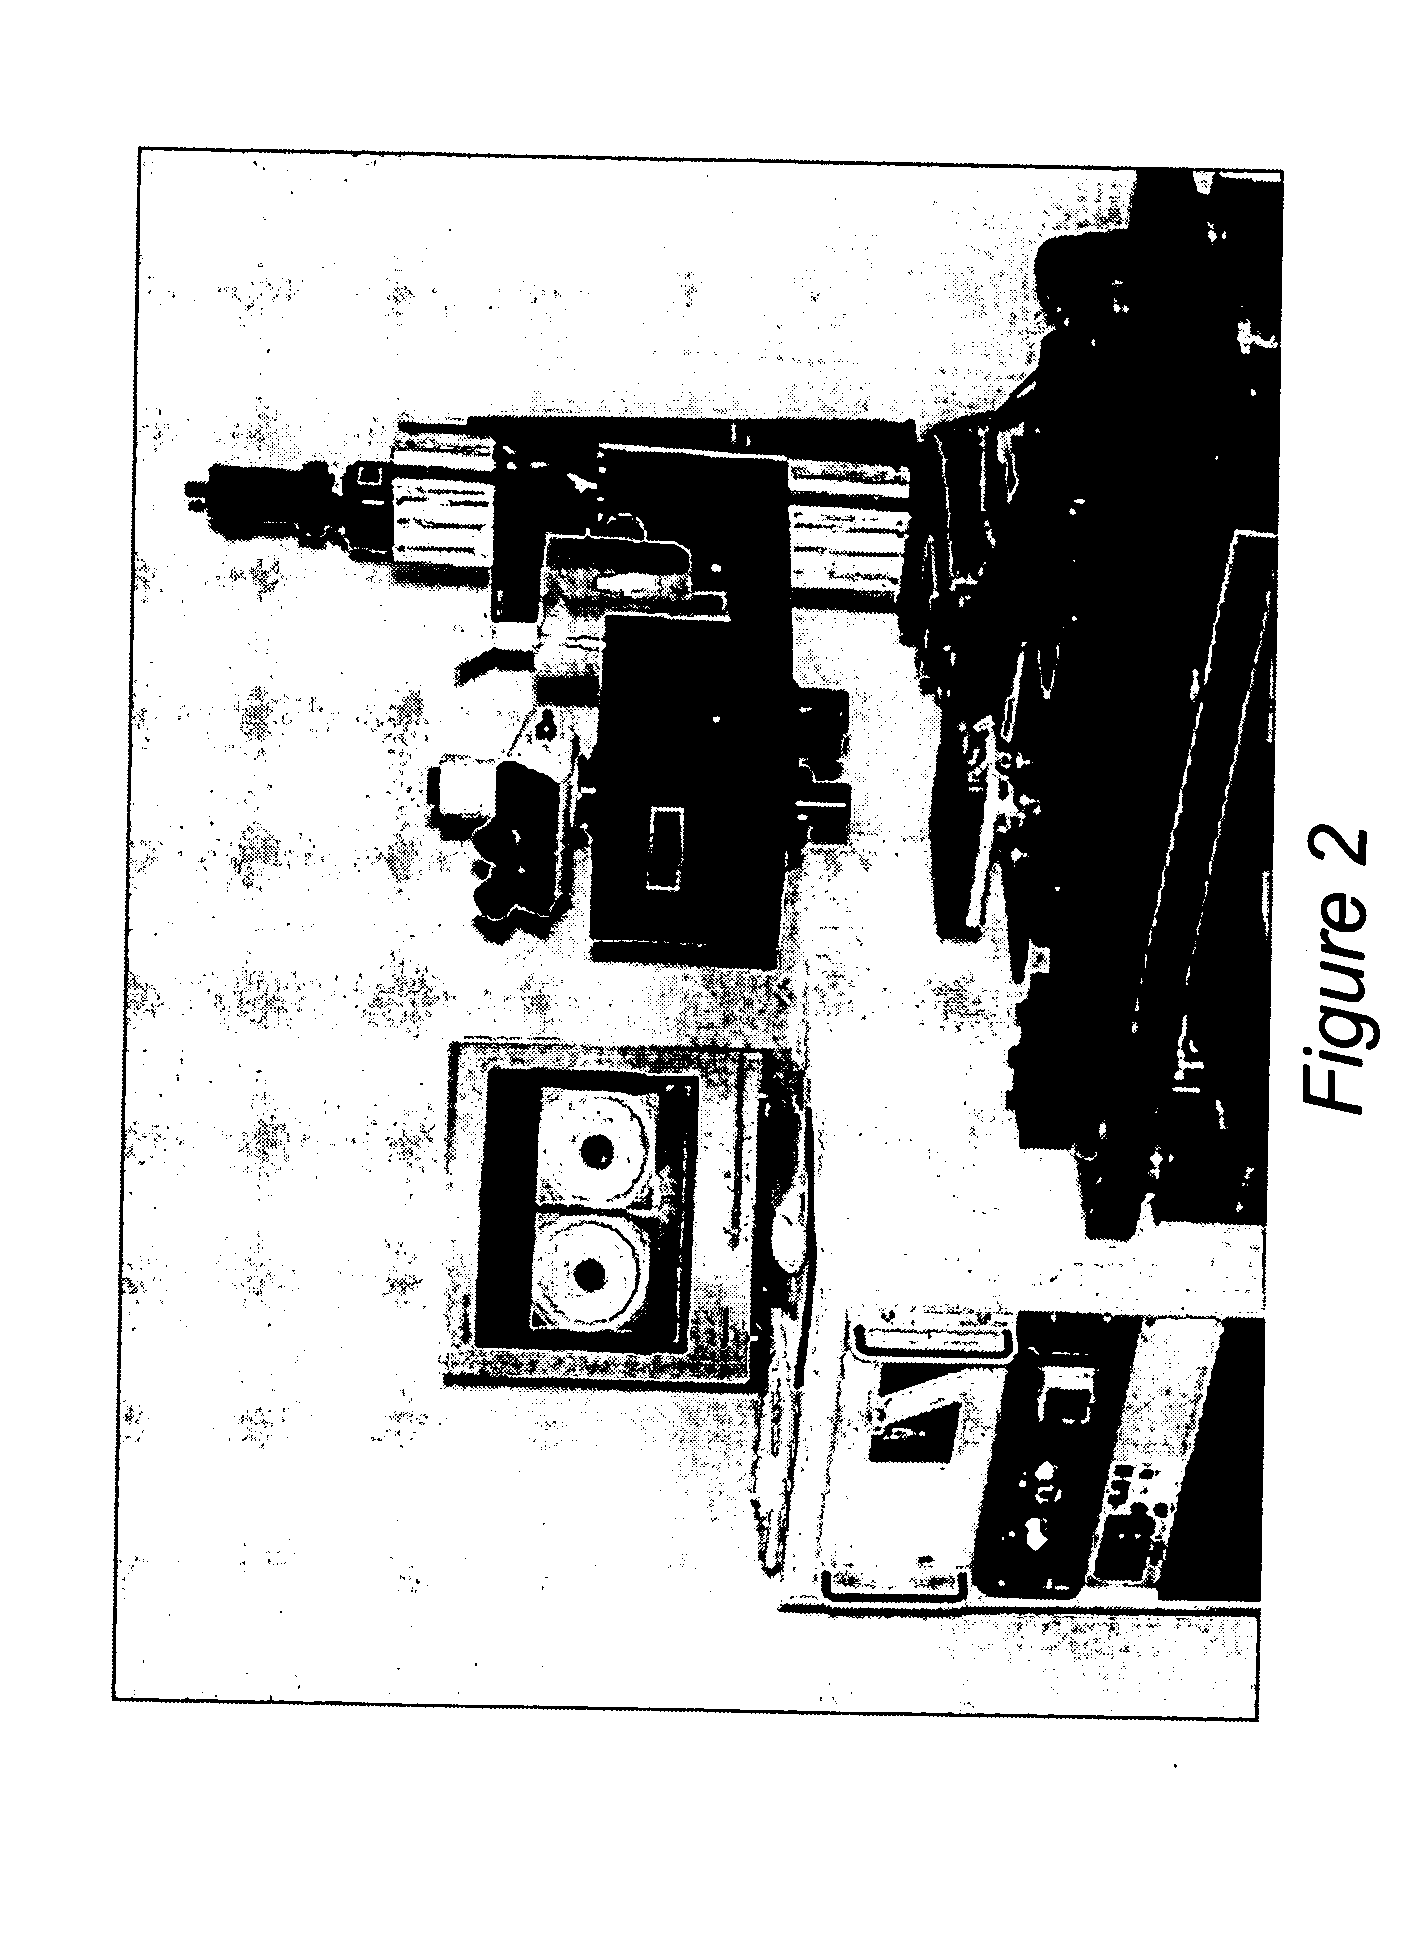 Method and apparatus for alignment, comparison & identification of characteristic tool marks, including ballistic signatures